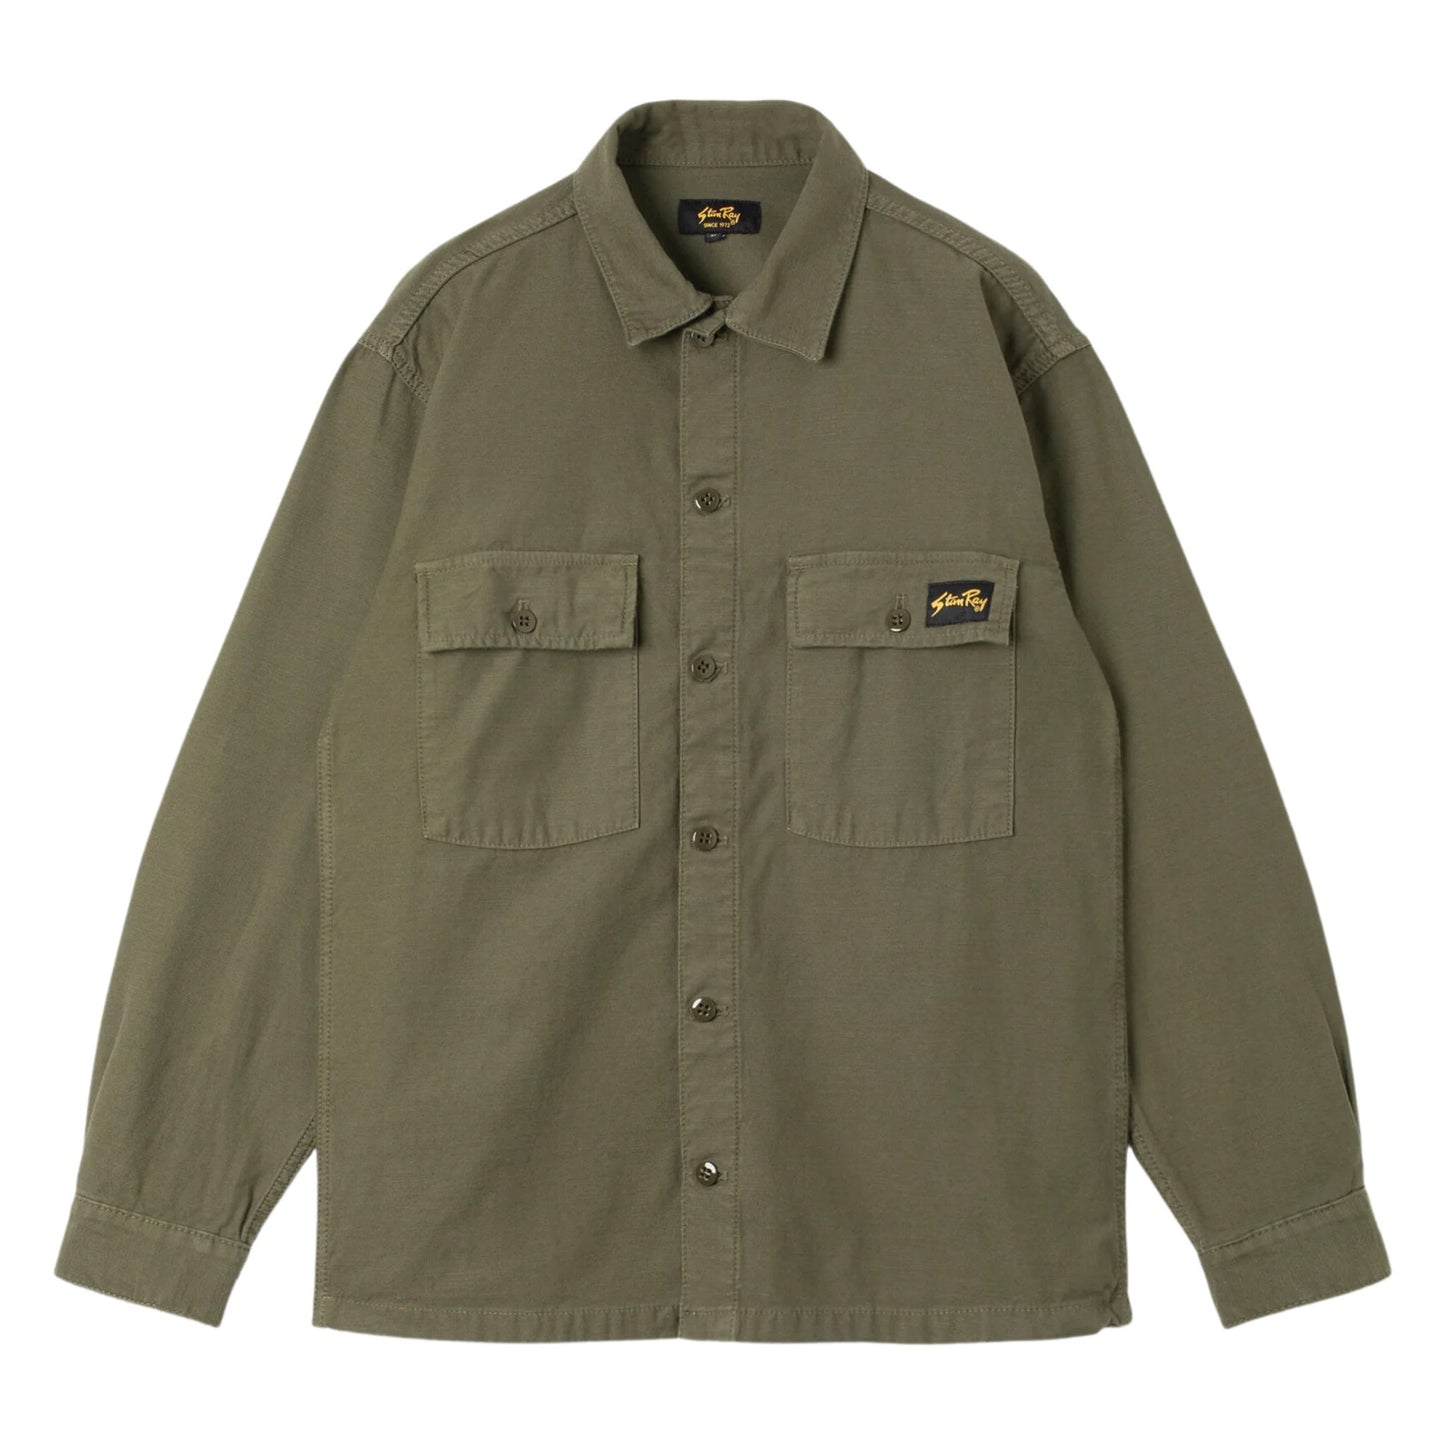 STAN RAY - Cpo Shirt Olive Sateen